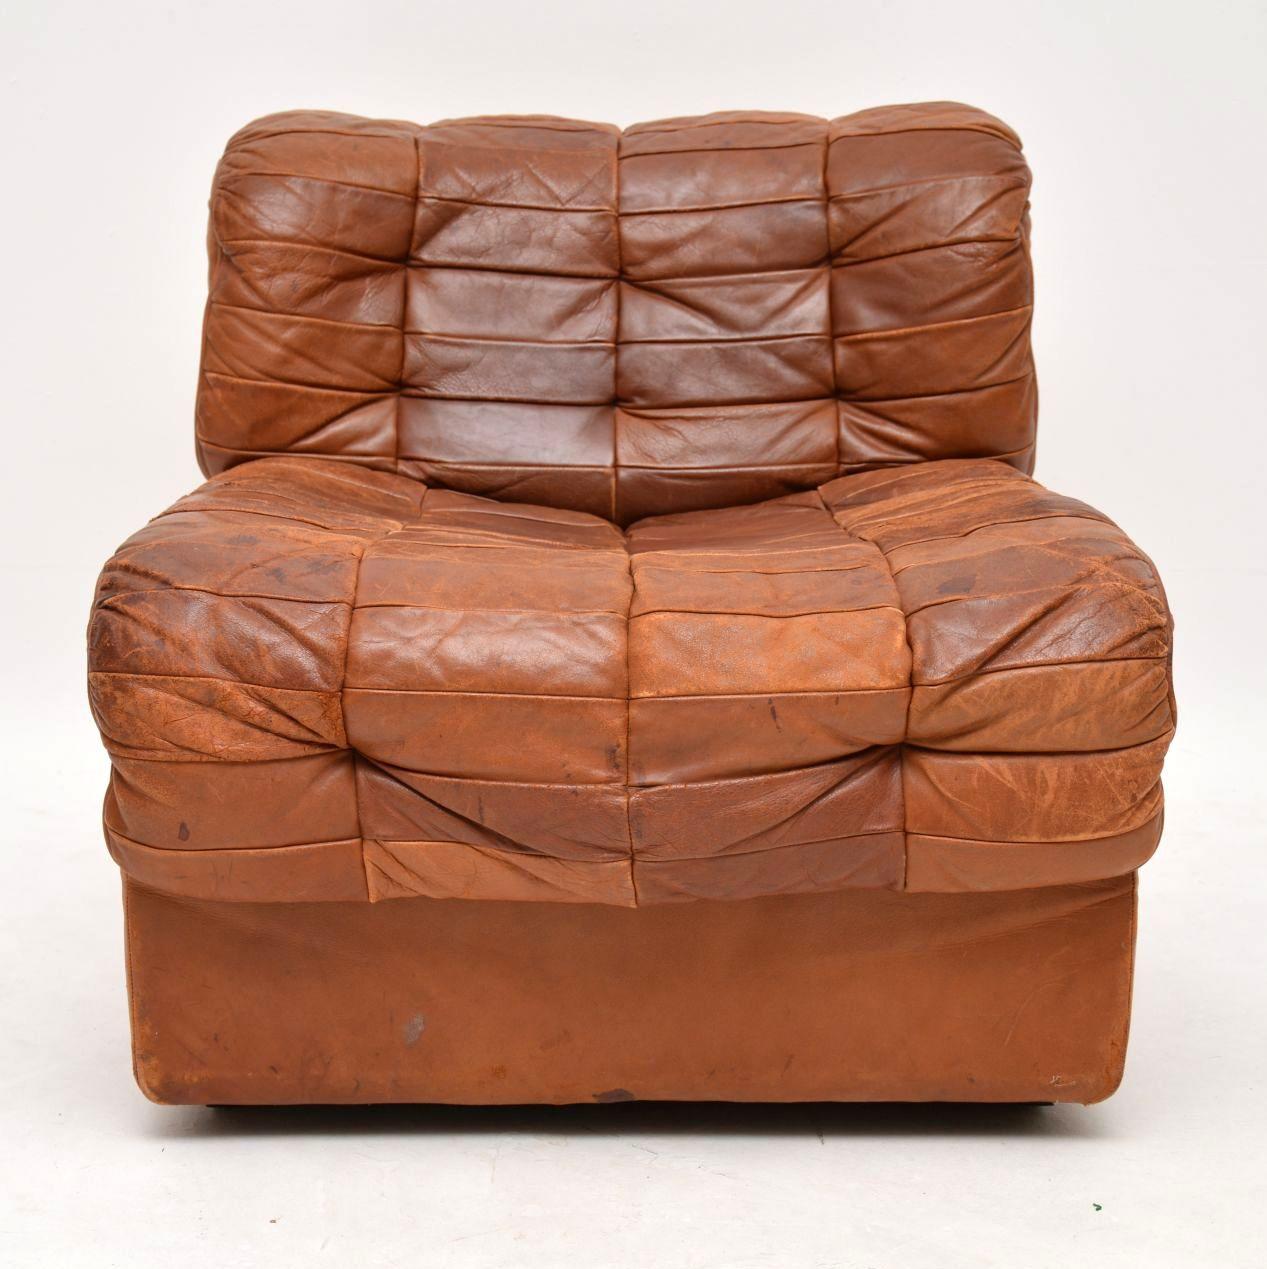 A lovely vintage modular unit in leather by De Sede, made in Switzerland and dating from the 1960s-1970s. This would originally have been part of a large modular sofa; we obtained this piece as a single which is quite unusual, and also unusual is